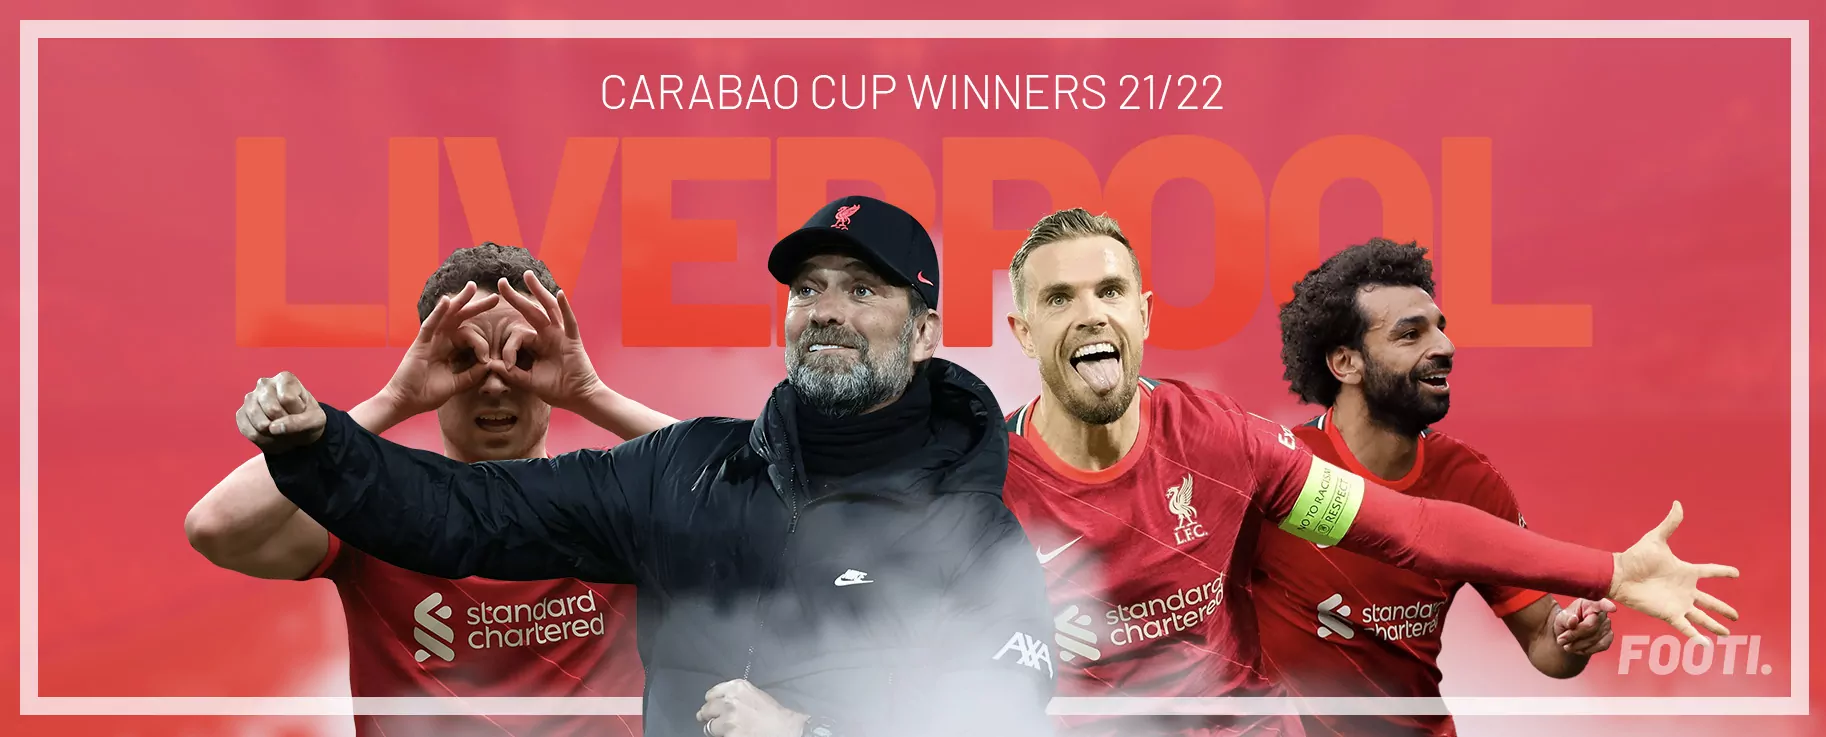  🏆 Liverpool are the 21/22 Carabao Cup winners.